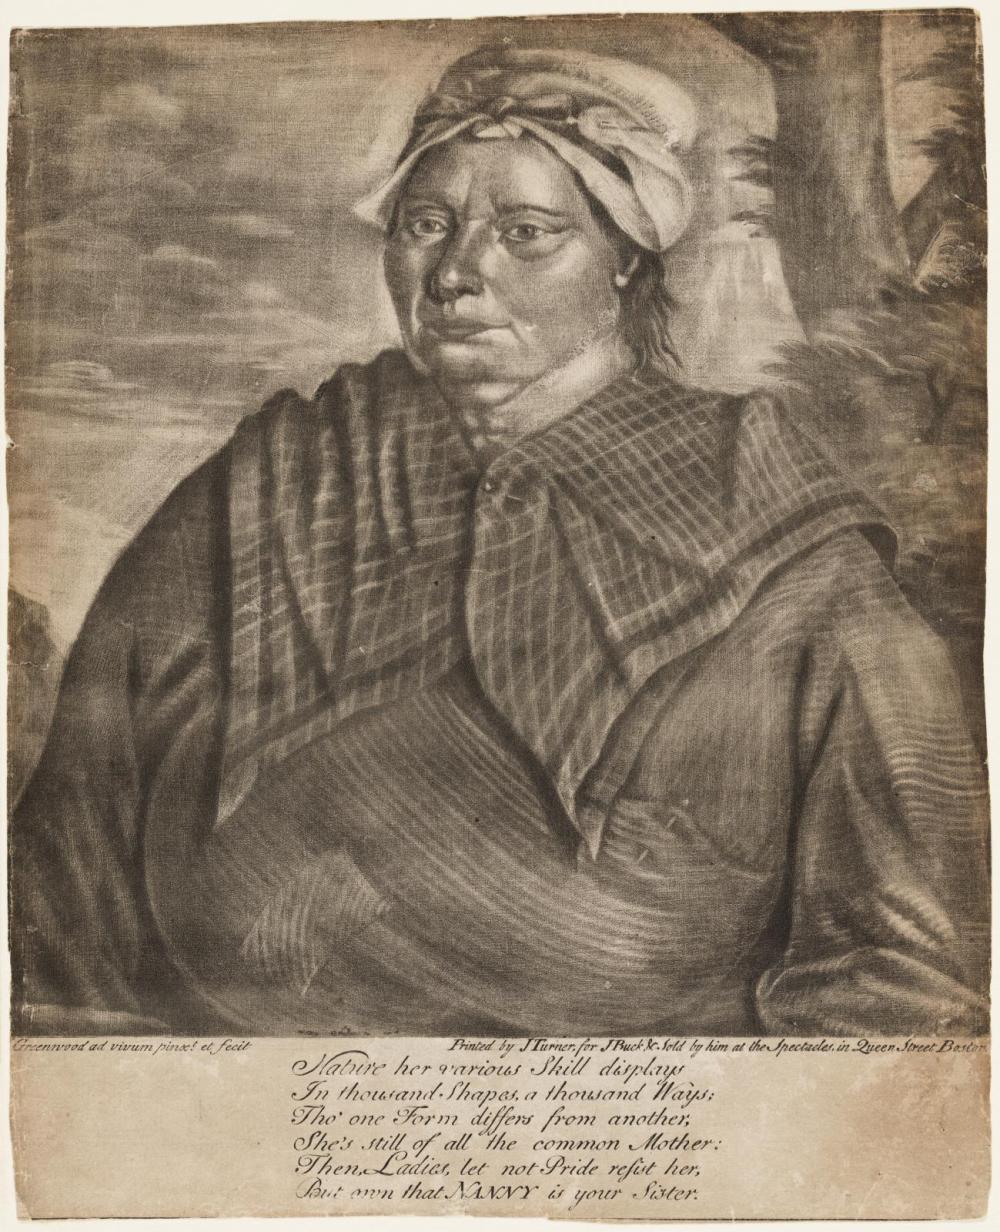 Mezzotint showing a woman in a cloth headwrap and plain overgarment. Abolitionist text verse underneath